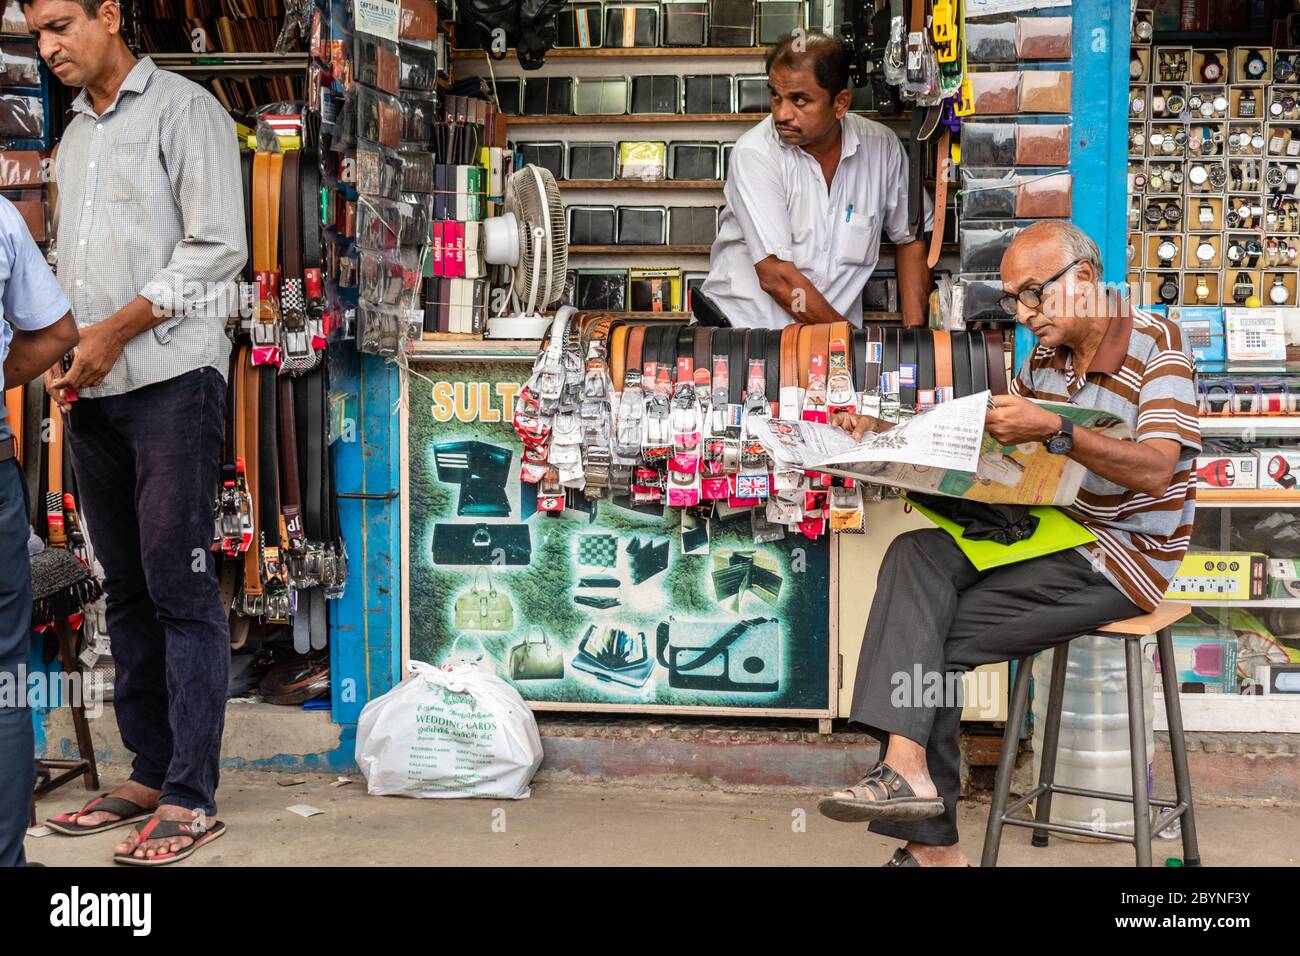 Chennai, Tamil Nadu, India - August 2018: An elderly Indian man reads a newspaper sitting outside a shop that sells belts and leather goods. Stock Photo